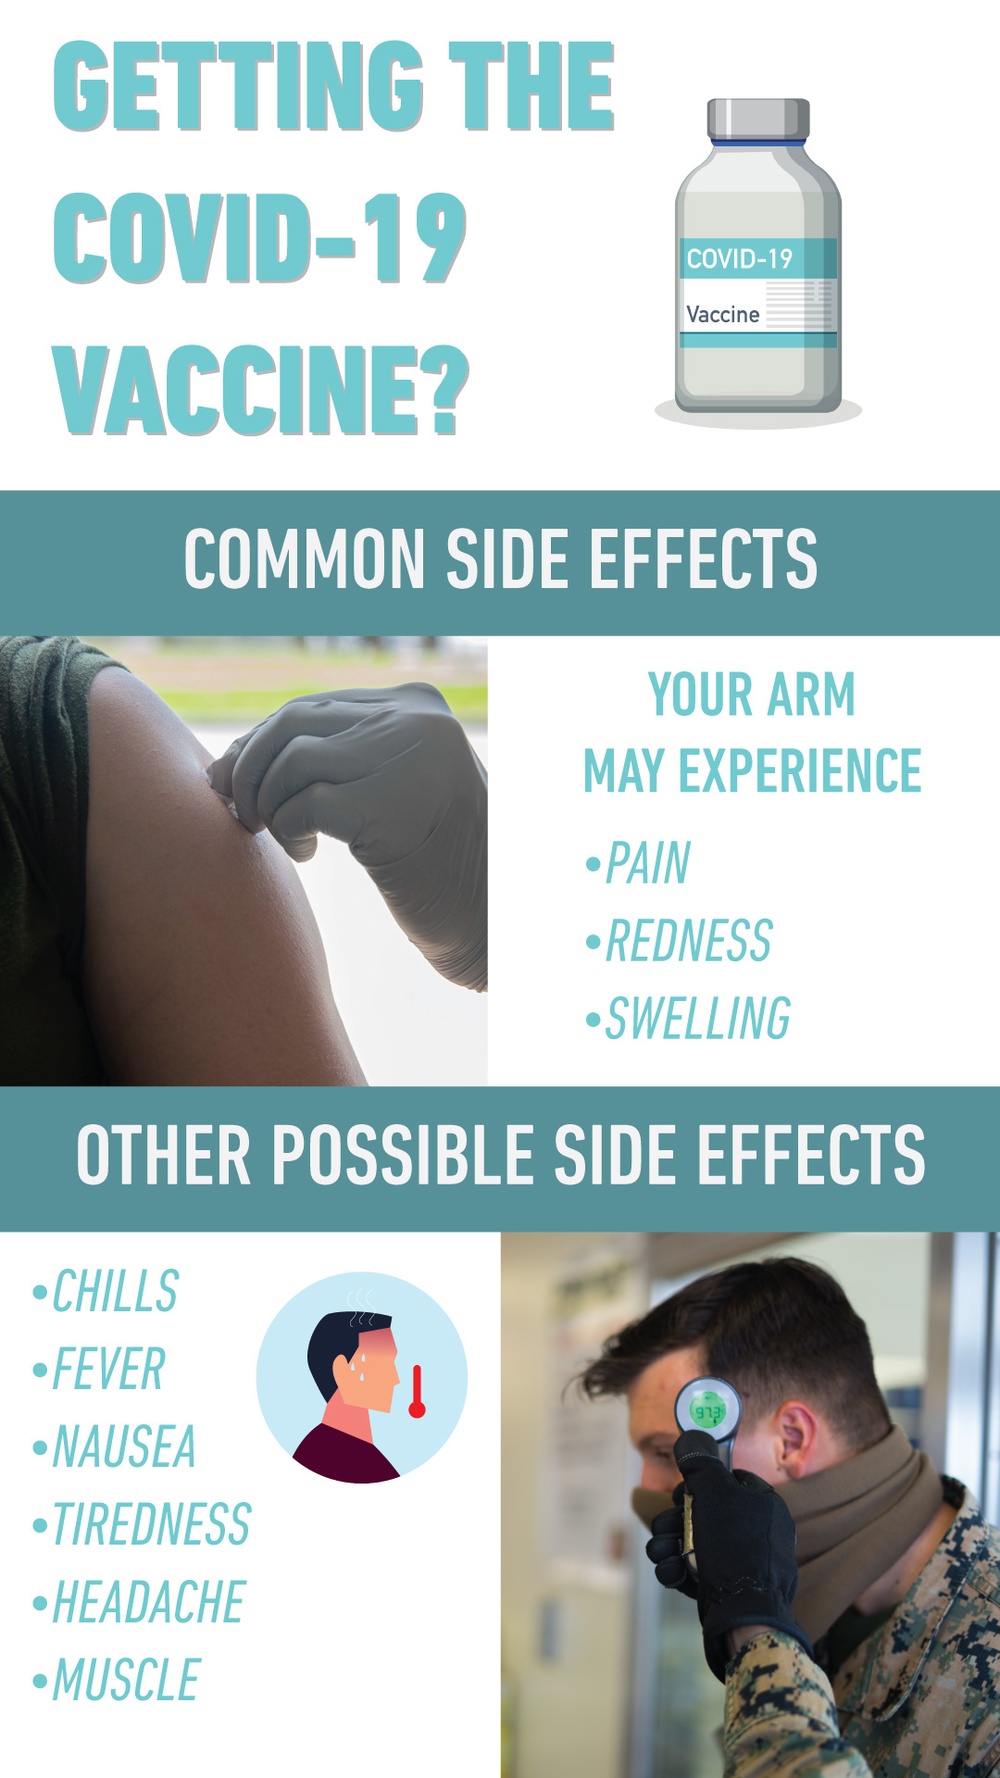 COVID-19 Vaccine common side effects.